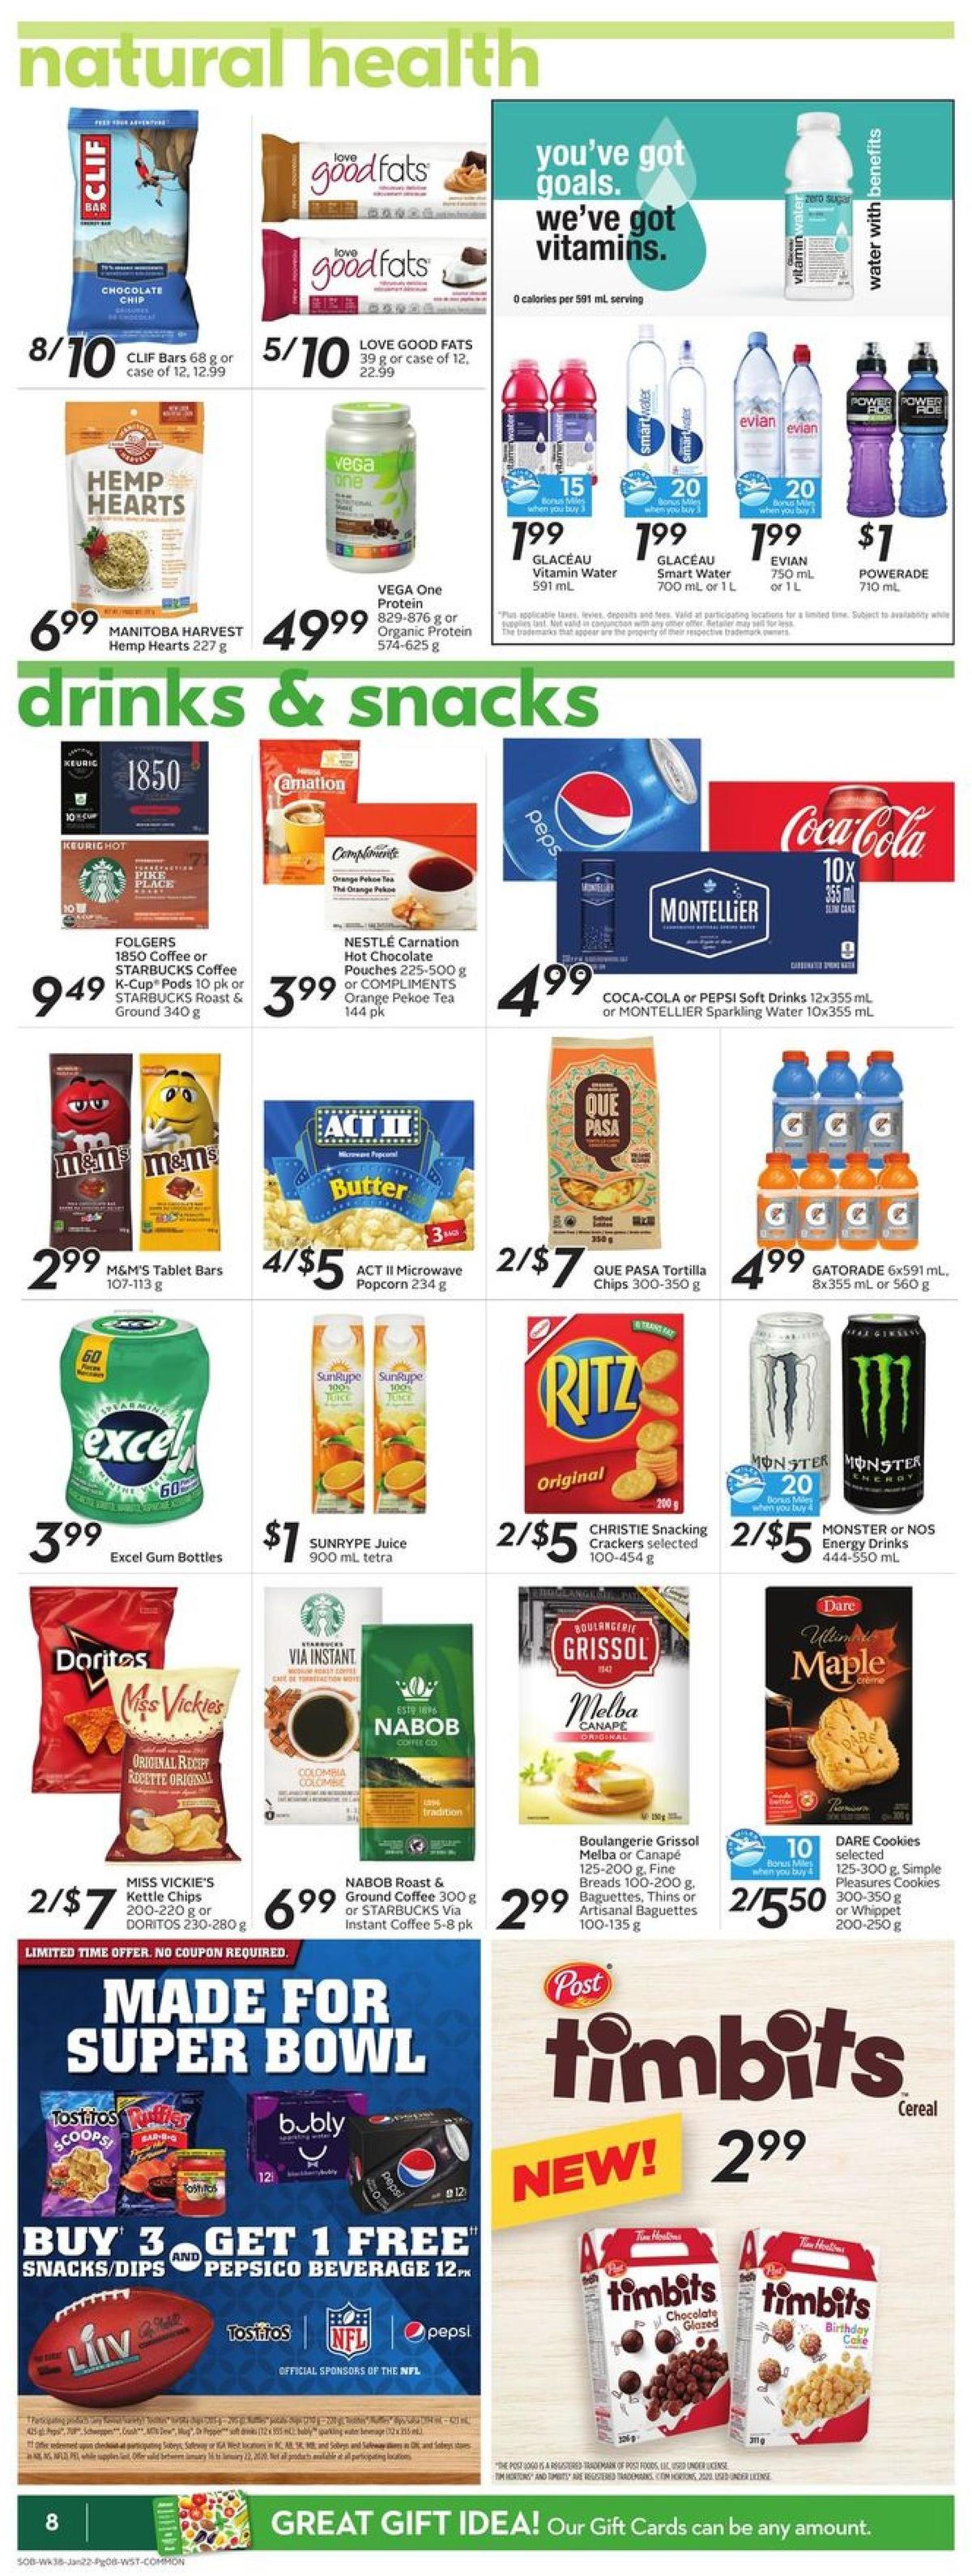 Safeway Flyer from January 16